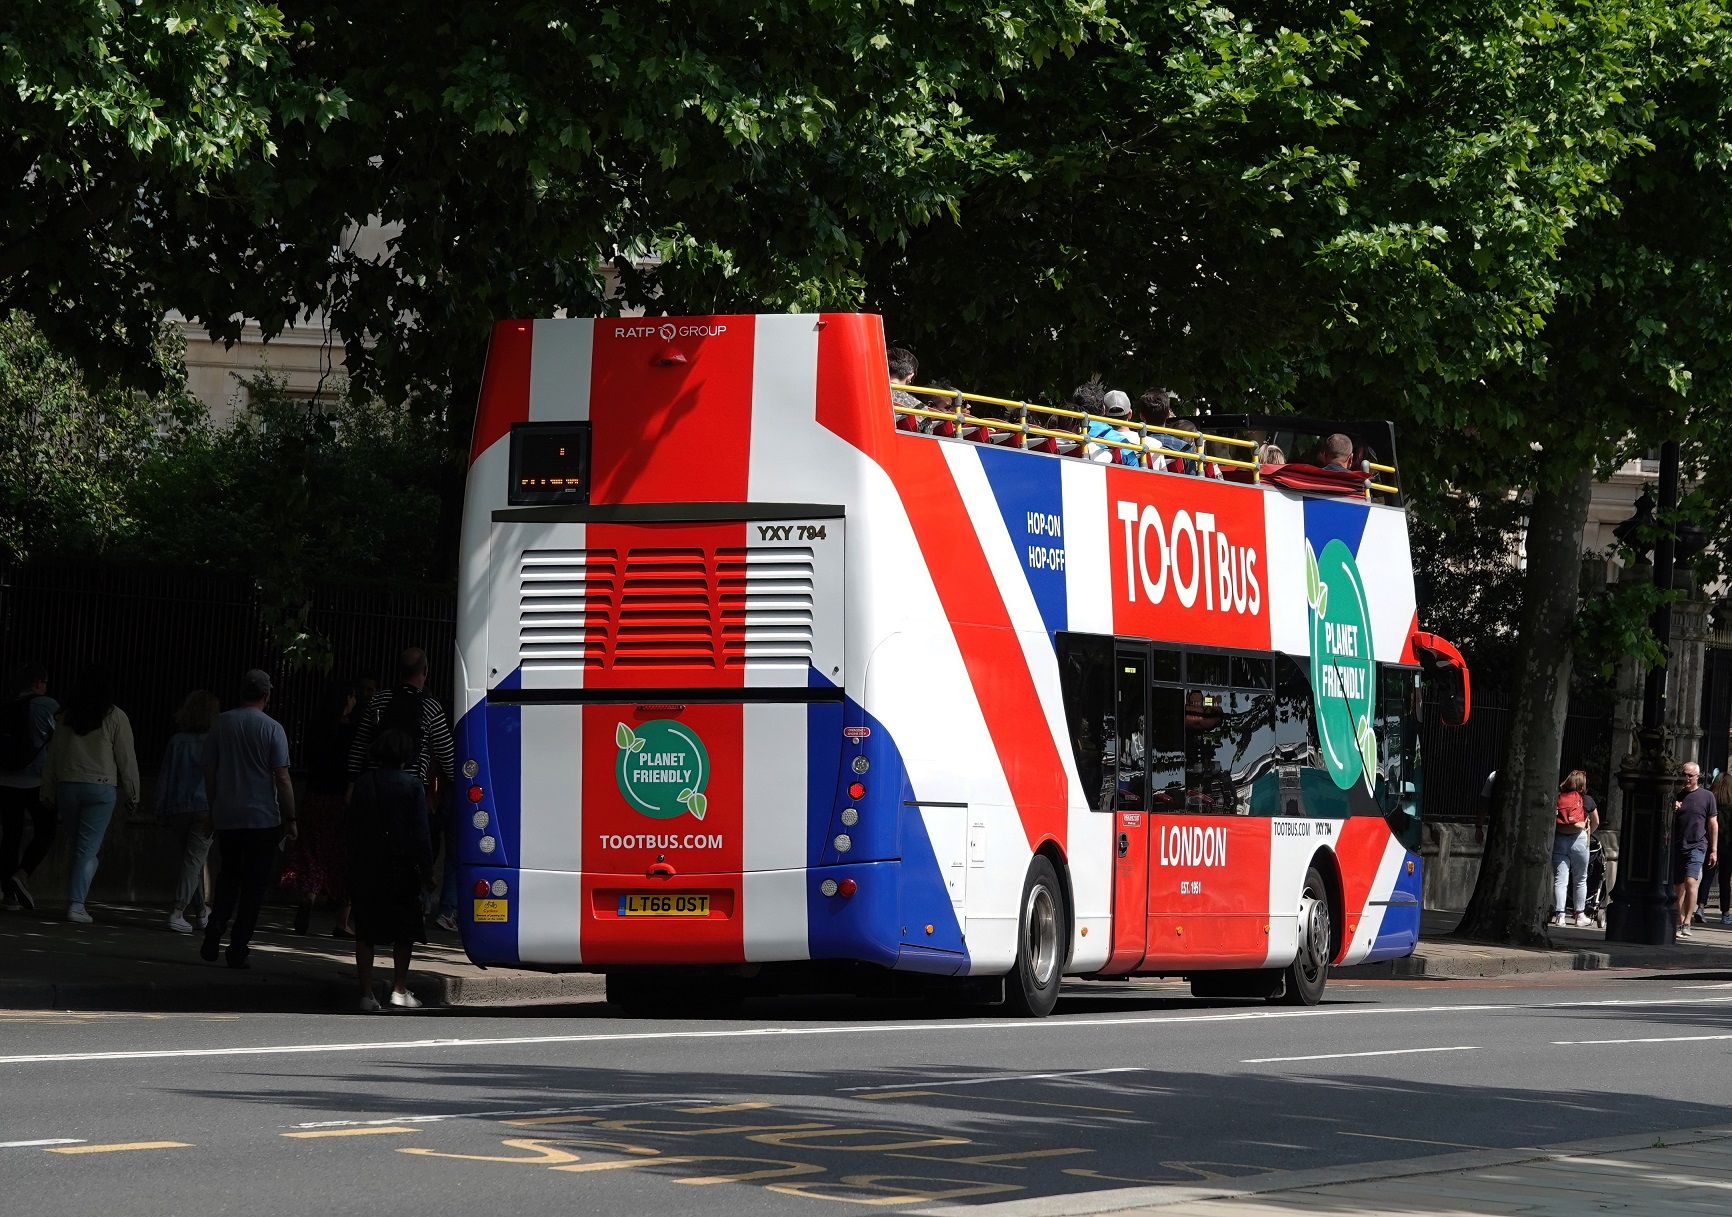 Tootbus London uses HVO as a fuel